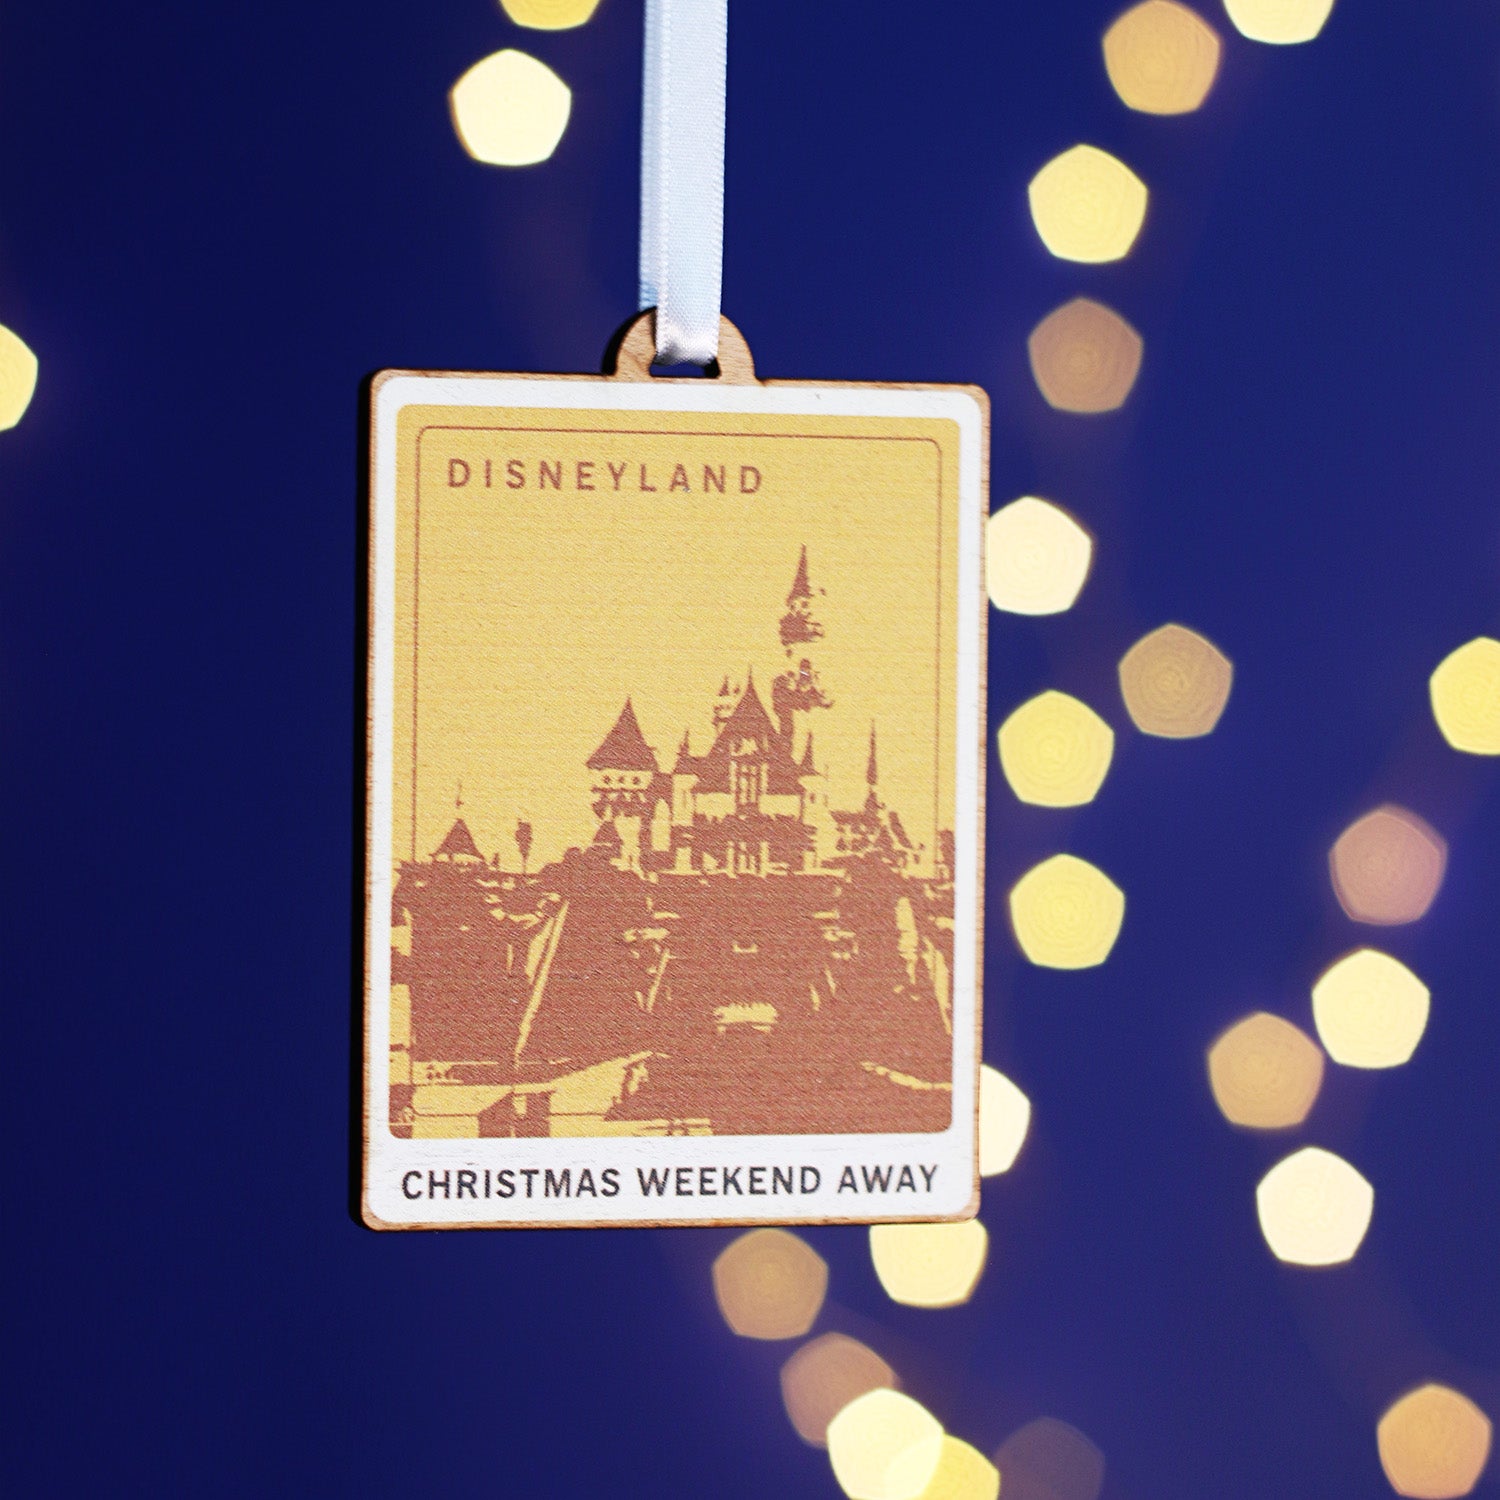 Wooden Christmas decoration with a picture representing Disneyland printed on it.